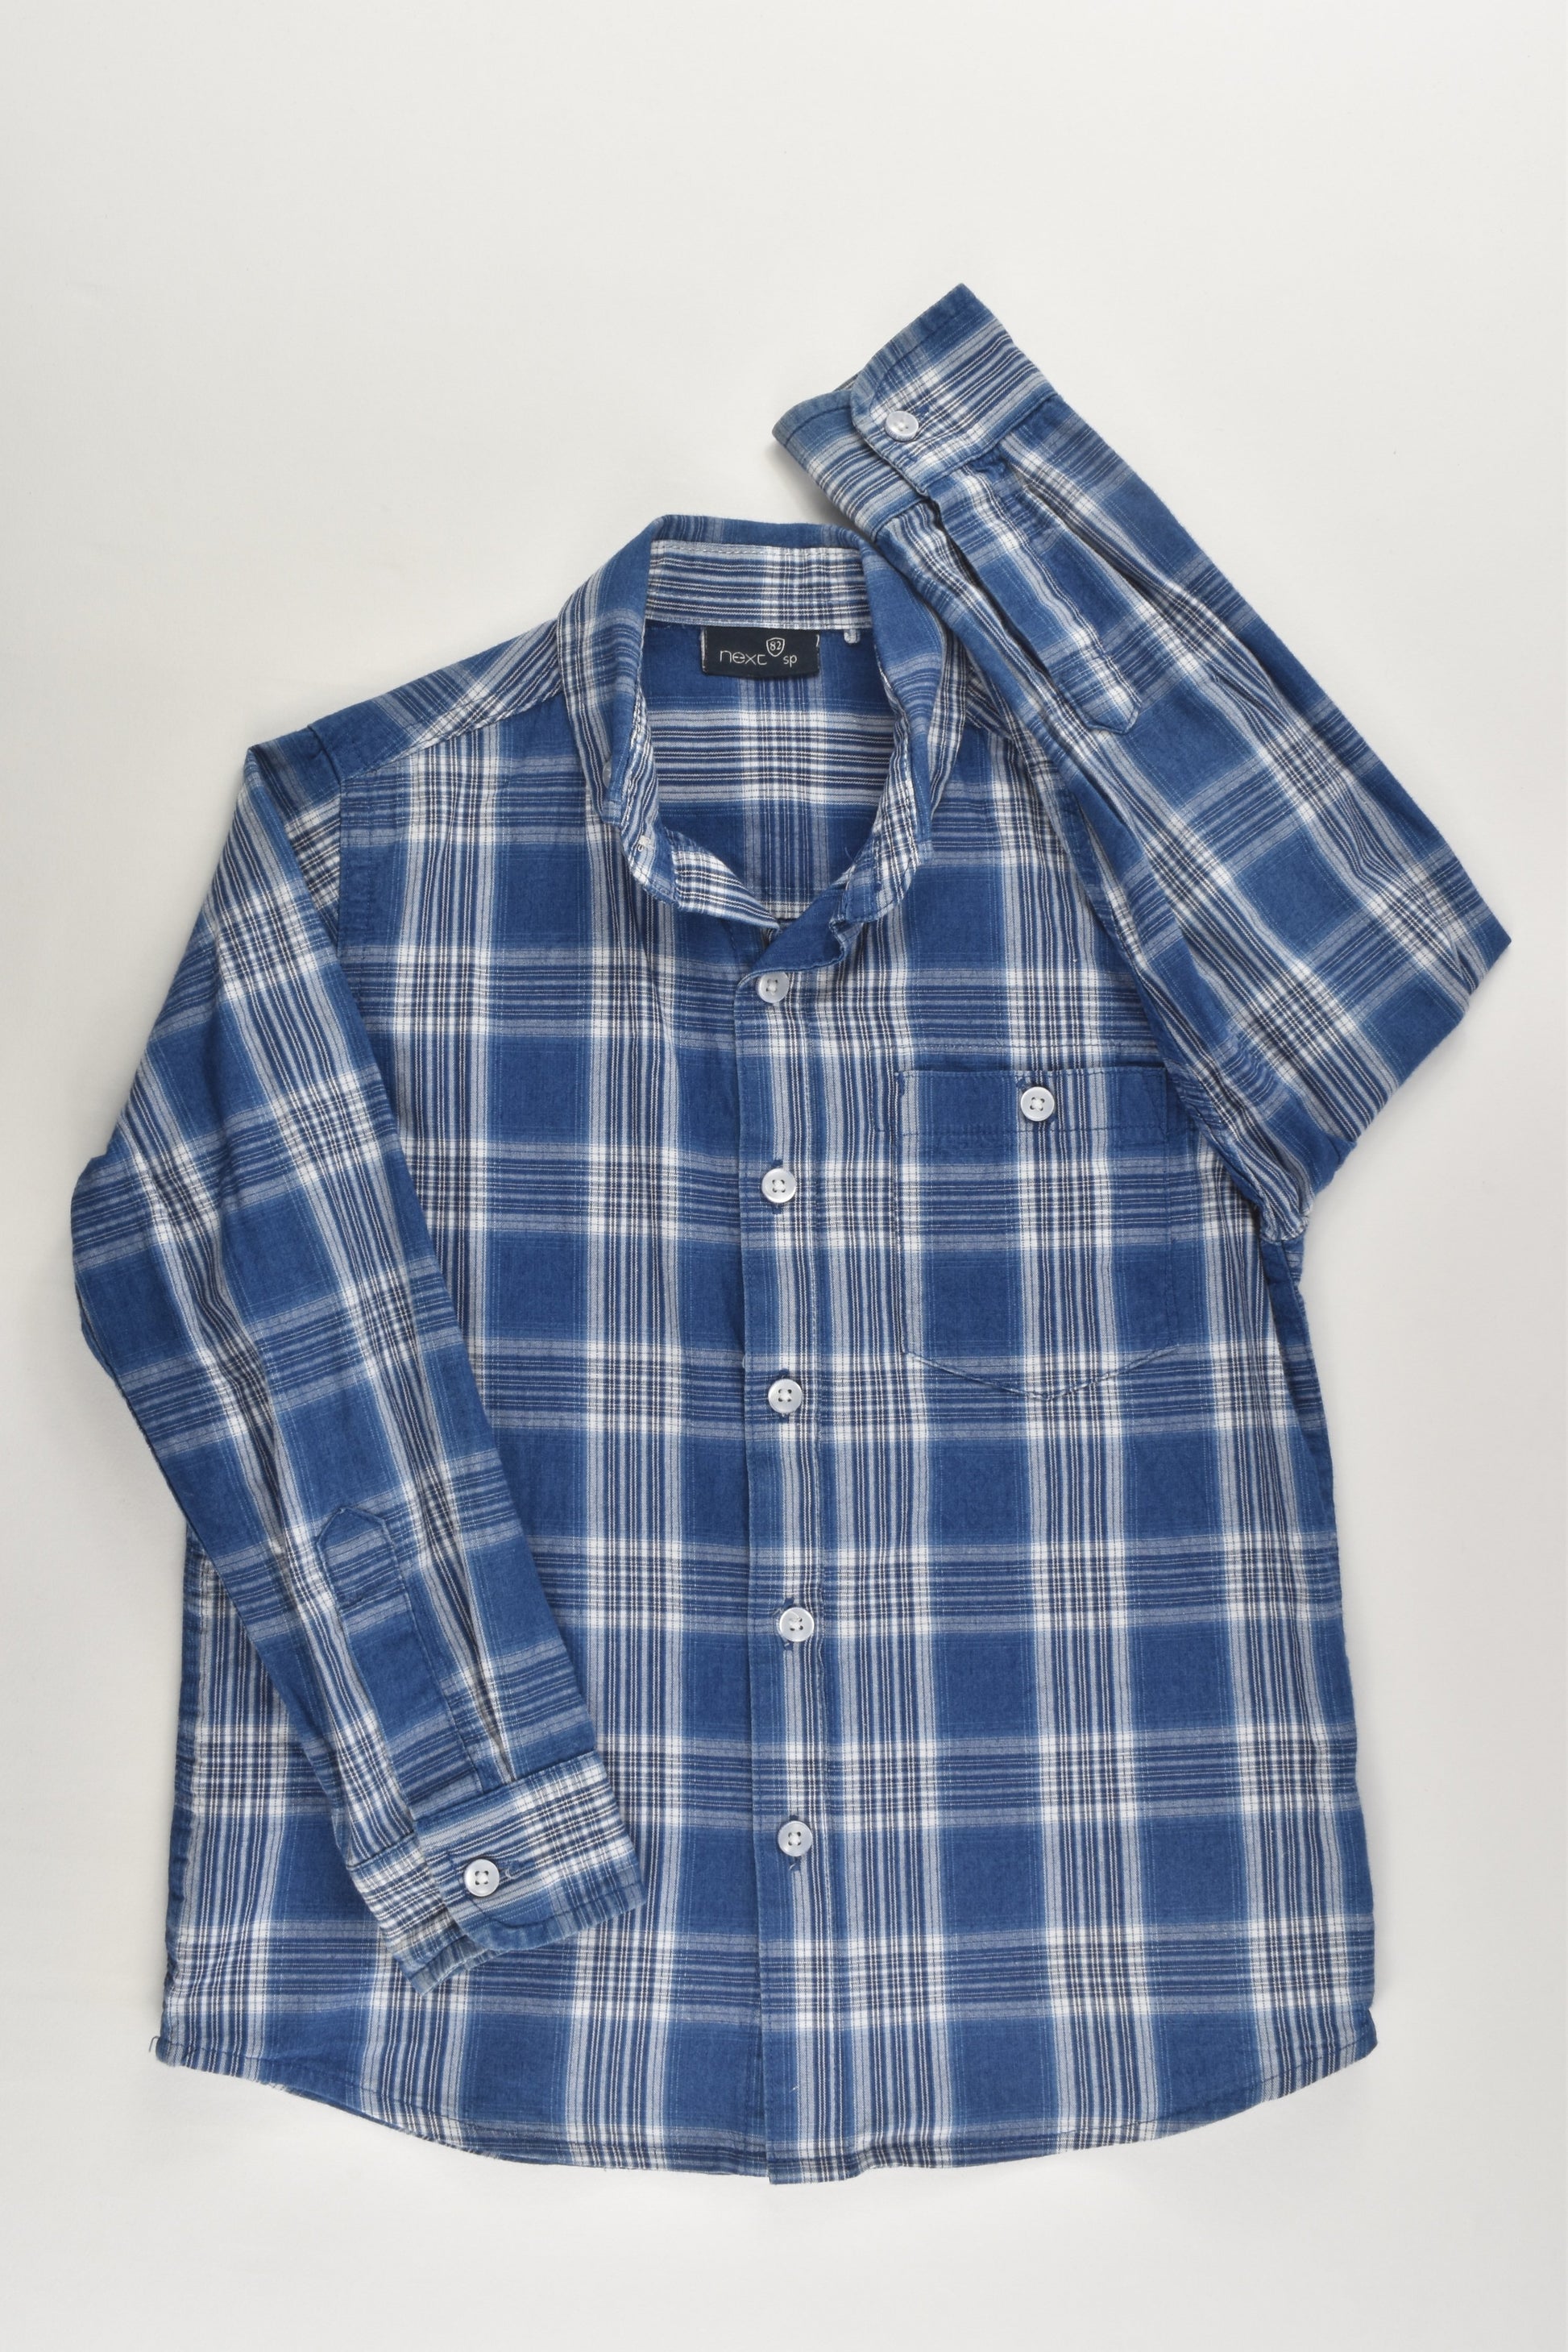 Next Size 5 (110 cm) Checked Collared Shirt